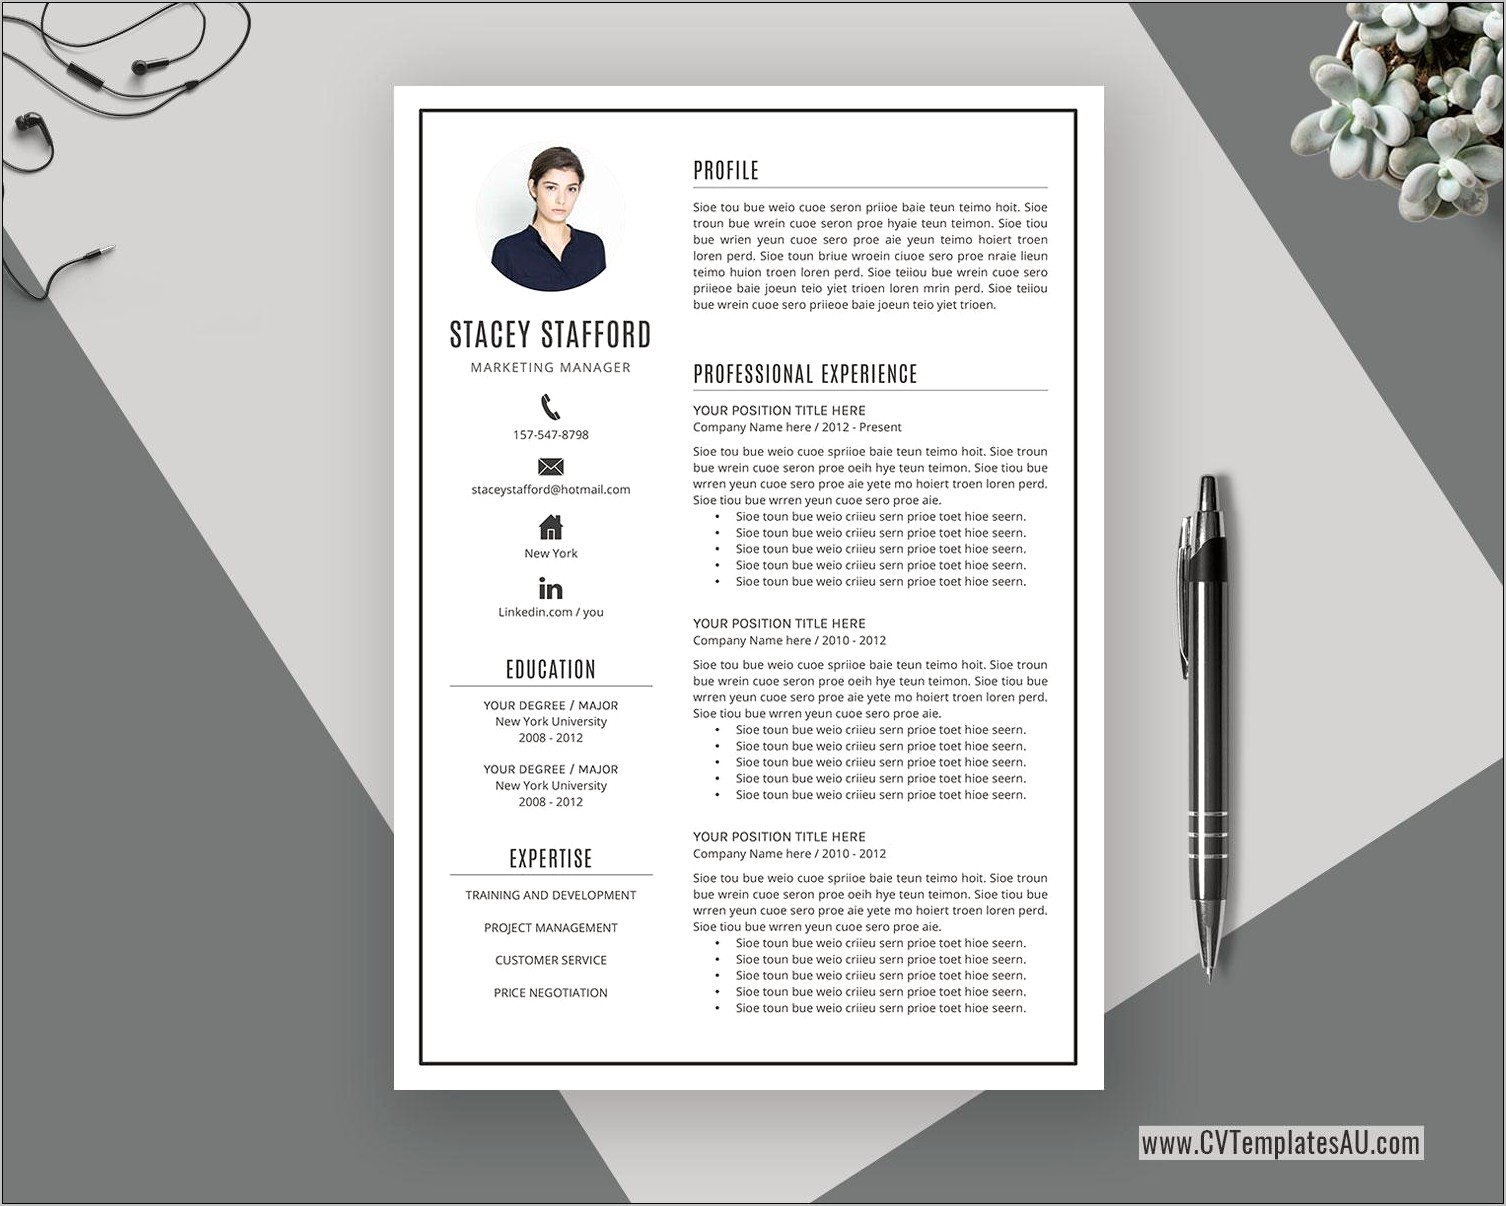 Sample Resume For It Professional With Experience Download